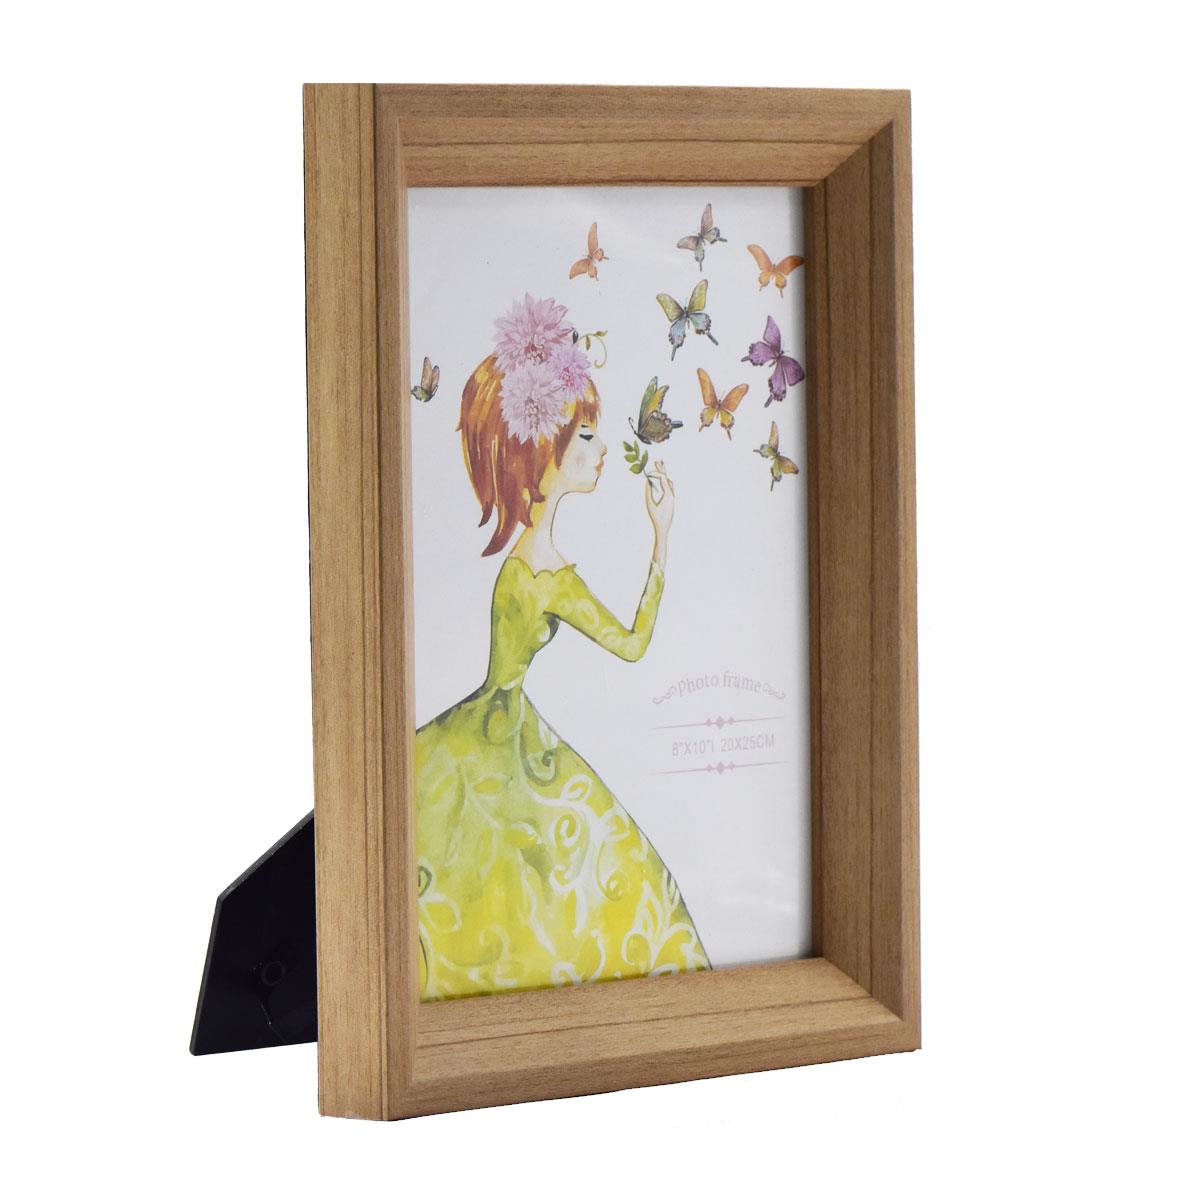 Wooden Border Photo Frame (8x10) inches (AR -20)